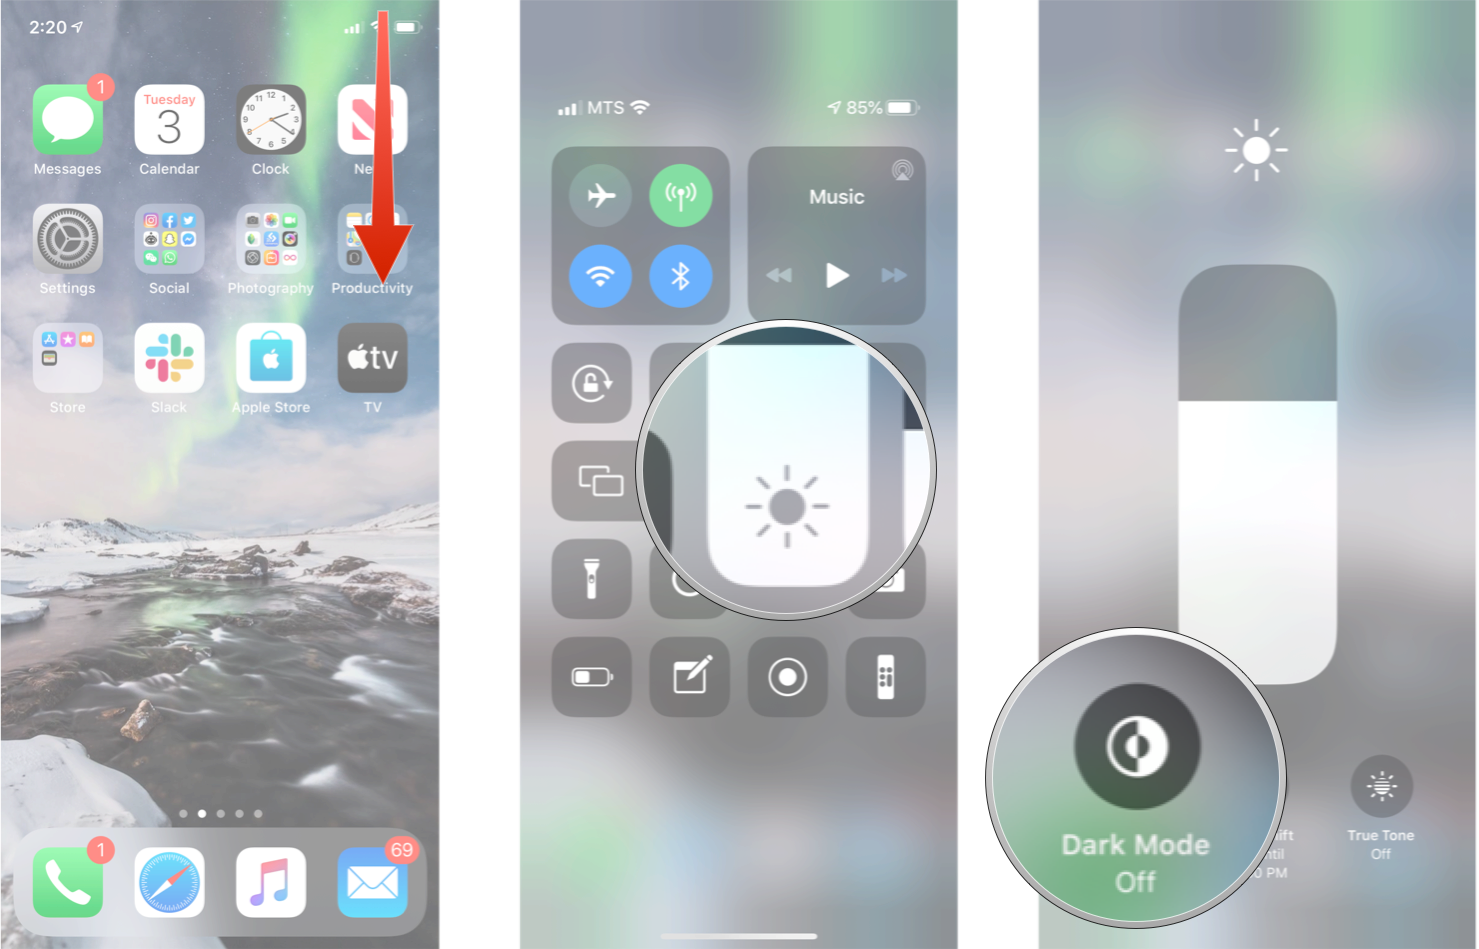 Open Control Center, press and hold the screen brightness slider, and then tap Dark Mode.